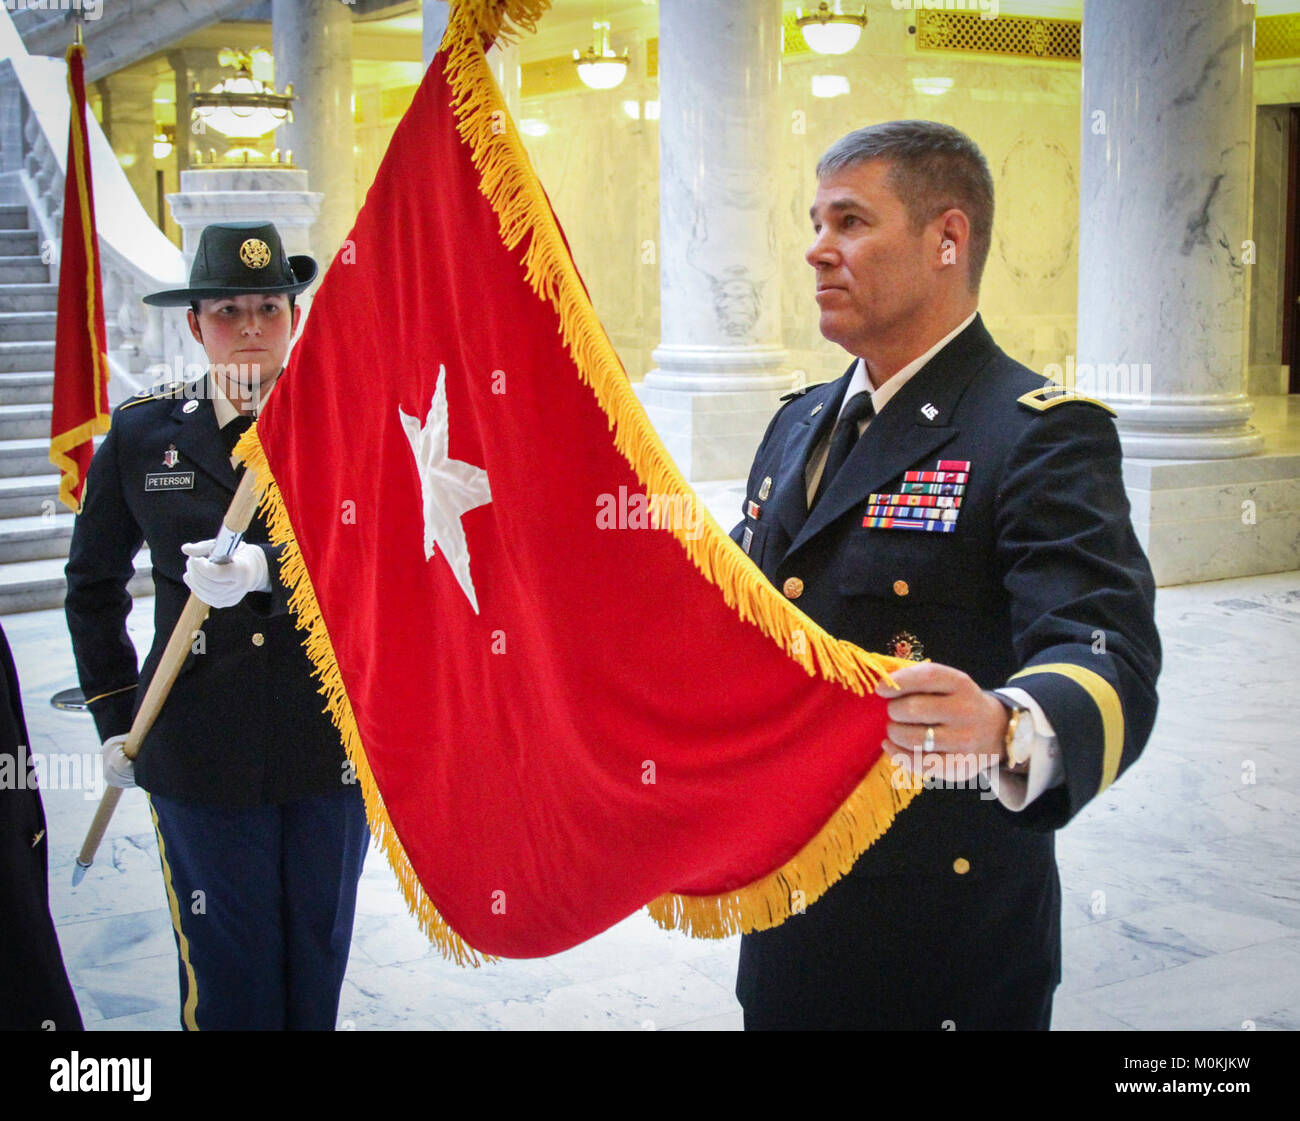 Army Reserve Brig. Gen. Doug Cherry (right), deputy commanding general, 76th Division (Operational Response), unfurls the brigadier general officers flag, during his promotion ceremony to brigadier general Jan. 6 at the Utah State Capital building in Salt Lake City. Cherry joined the Army in 1983 and has served in a variety of leadership positions during his lengthy career. (Official U.S. Army Reserve Stock Photo